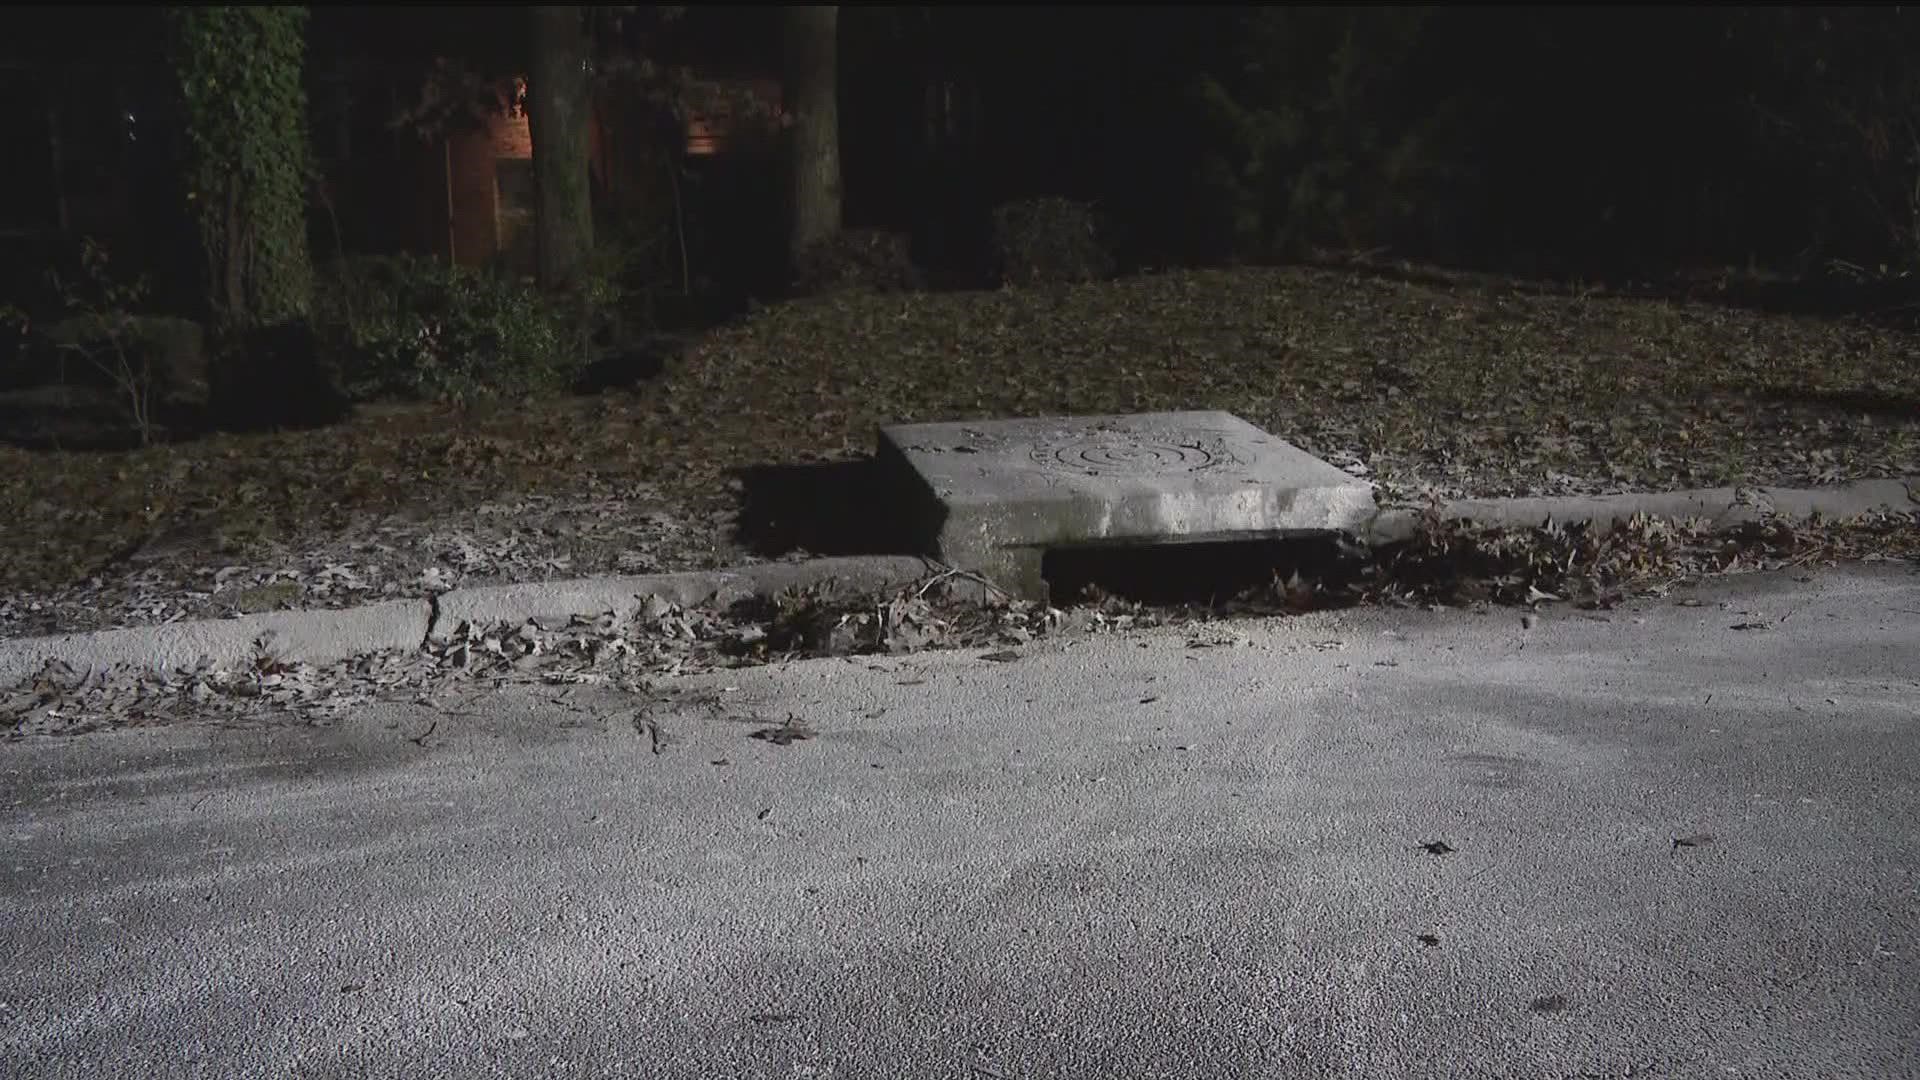 Authorities are investigating an explosion in a Morrow neighborhood Monday night.